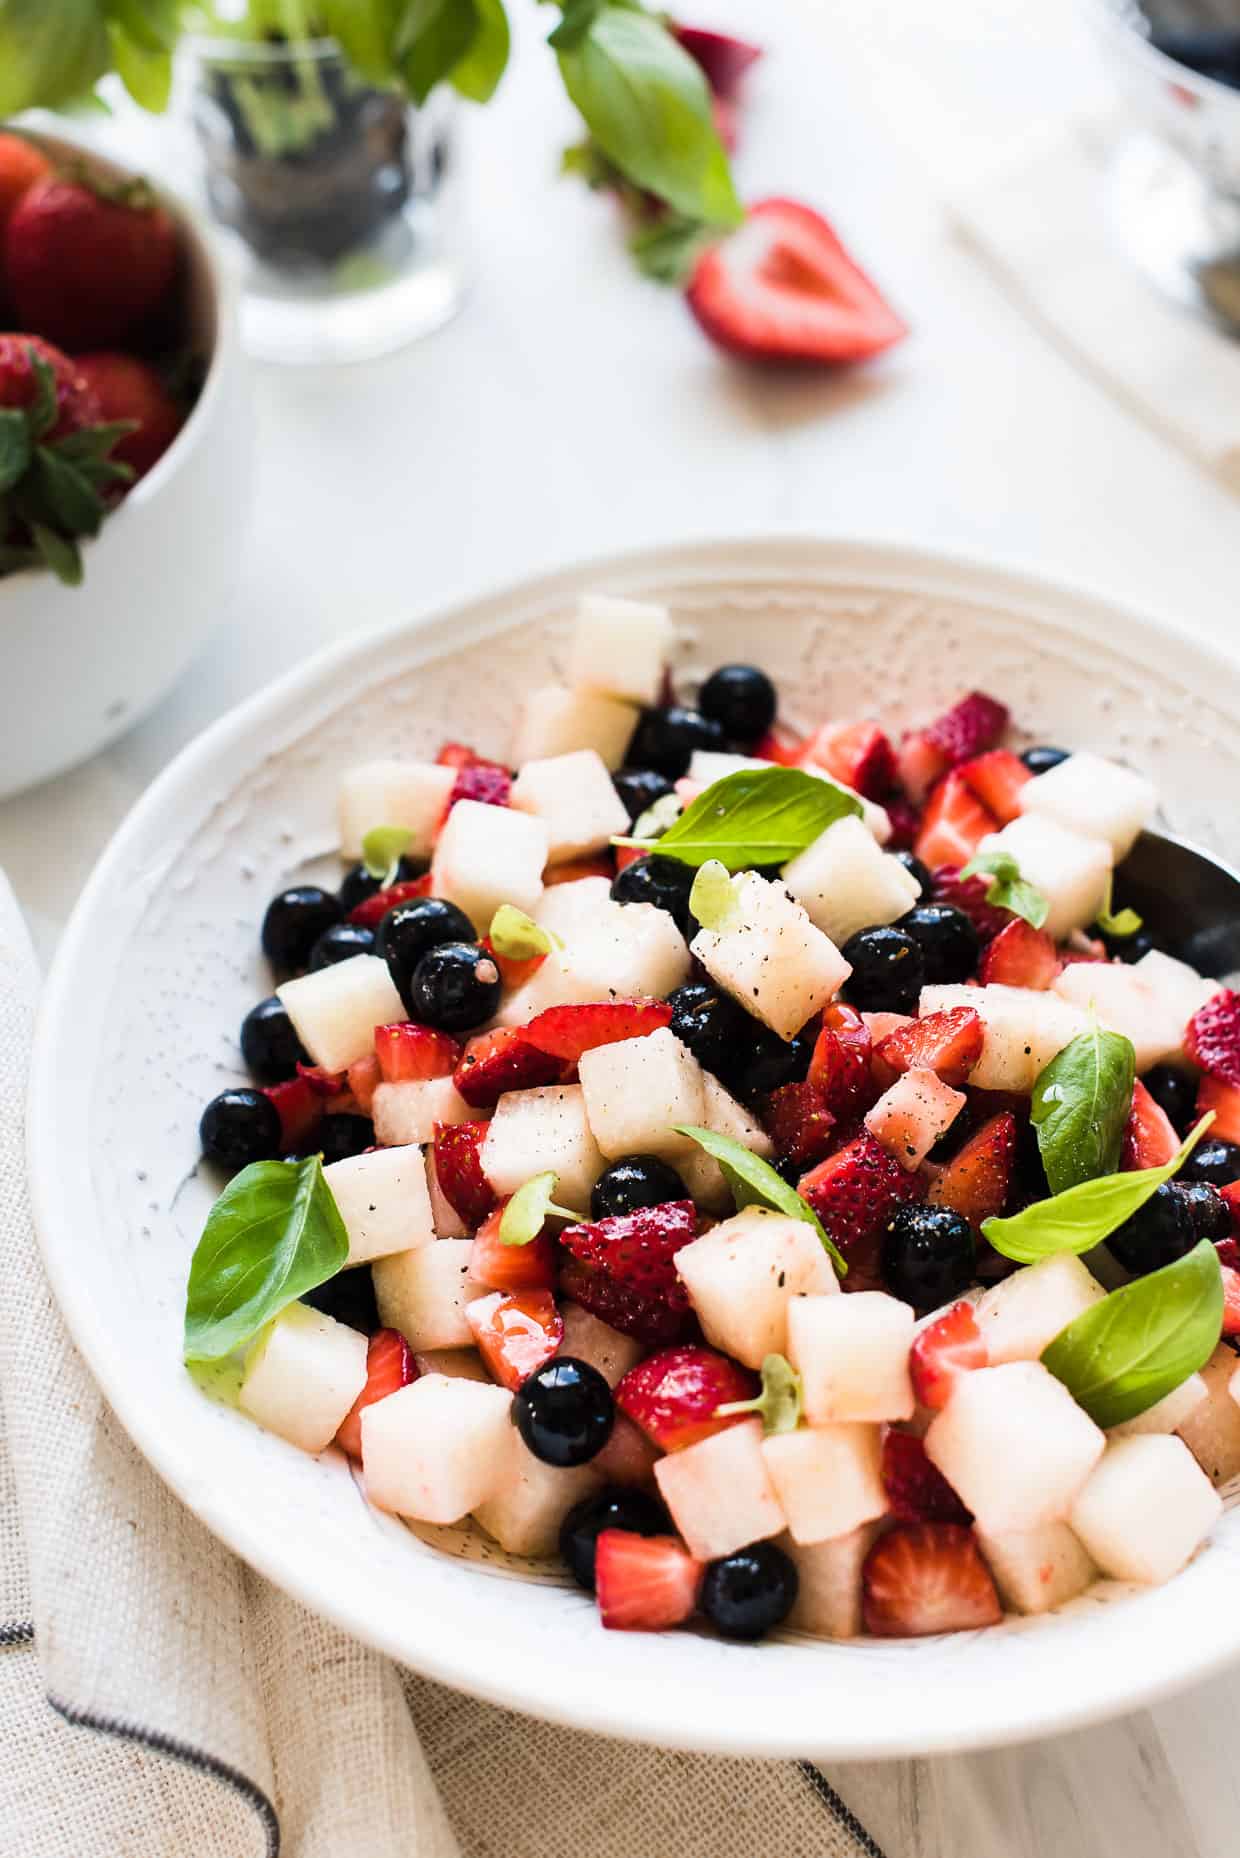 Strawberries, blueberries, and crispy jicama come together for a super simple, patriotic, and barbecue-ready Red, White and Blue Berry Jicama Salad in a white bowl.